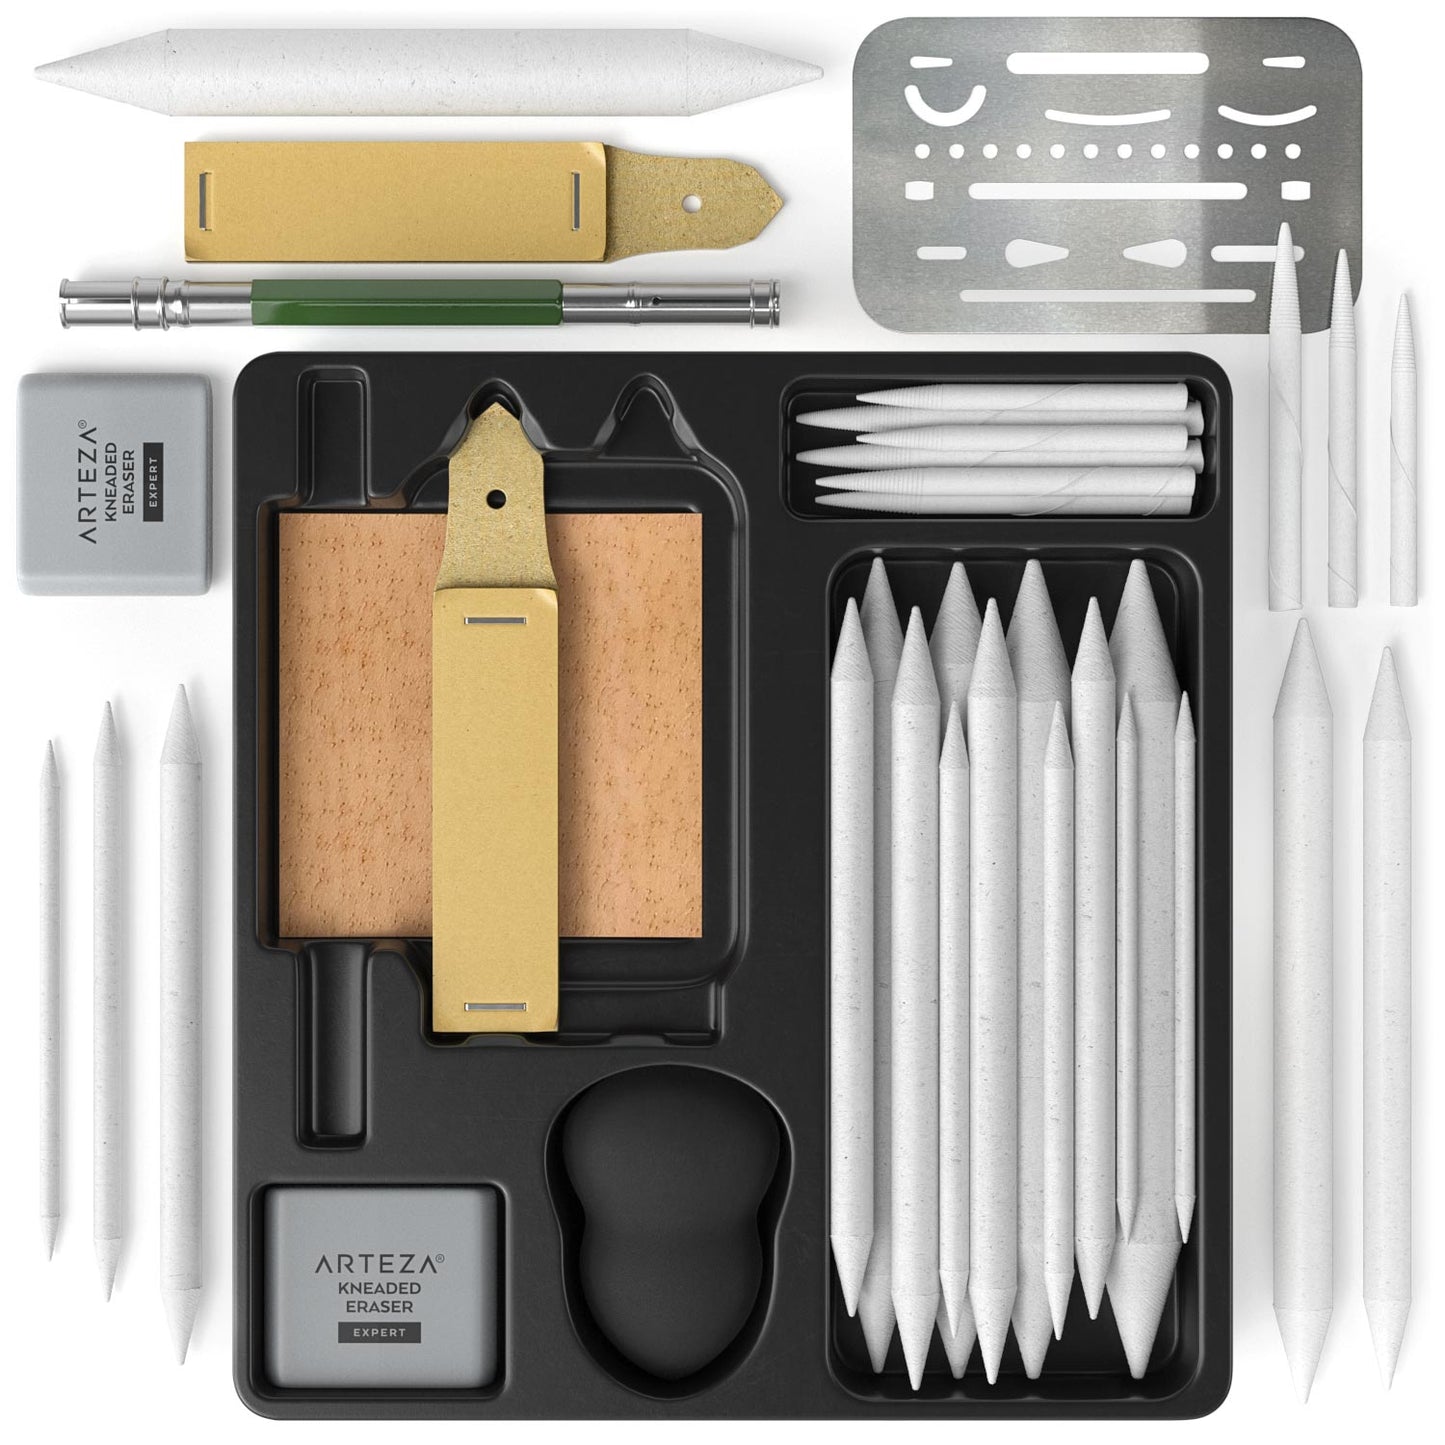 Drawing & Detailing Accessory Tools - 35 Piece Set